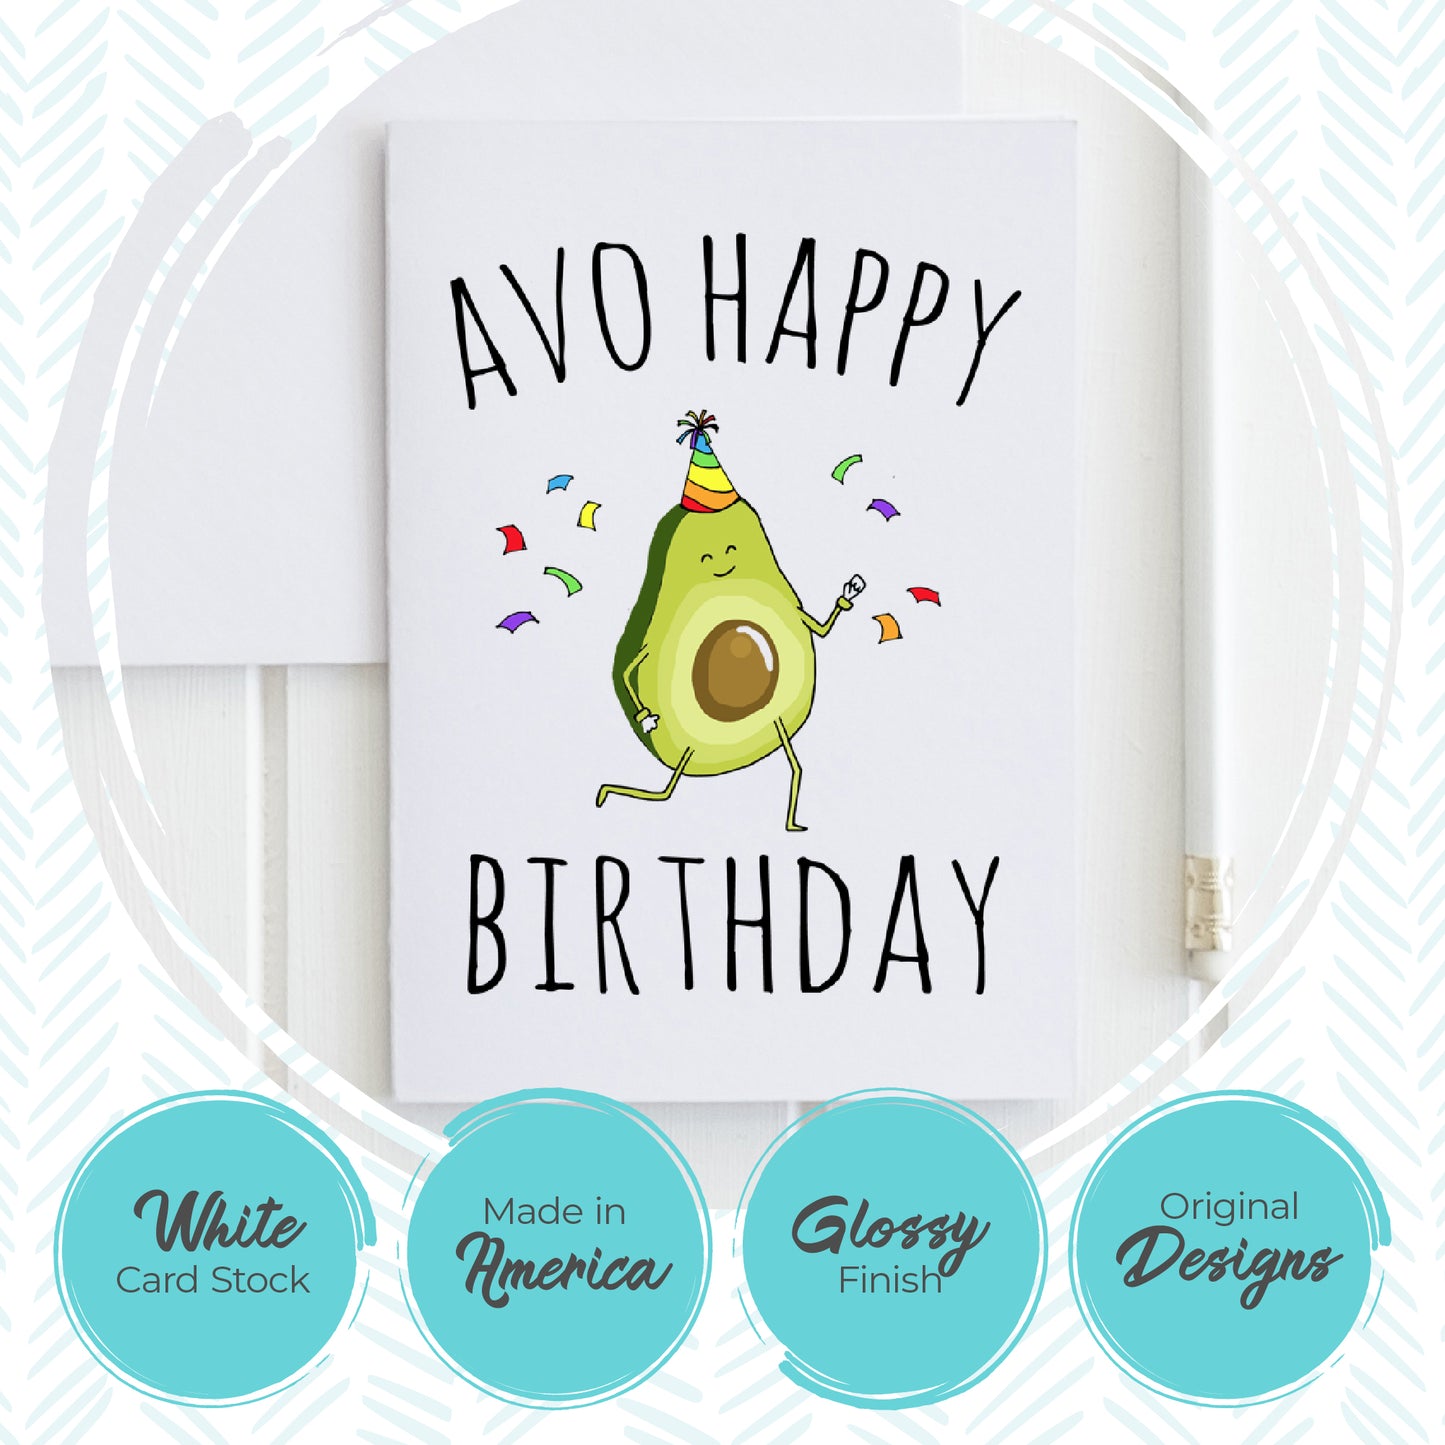 Every Now And Then I Fall Apart (Taco) - Greeting Card - MoonlightMakers